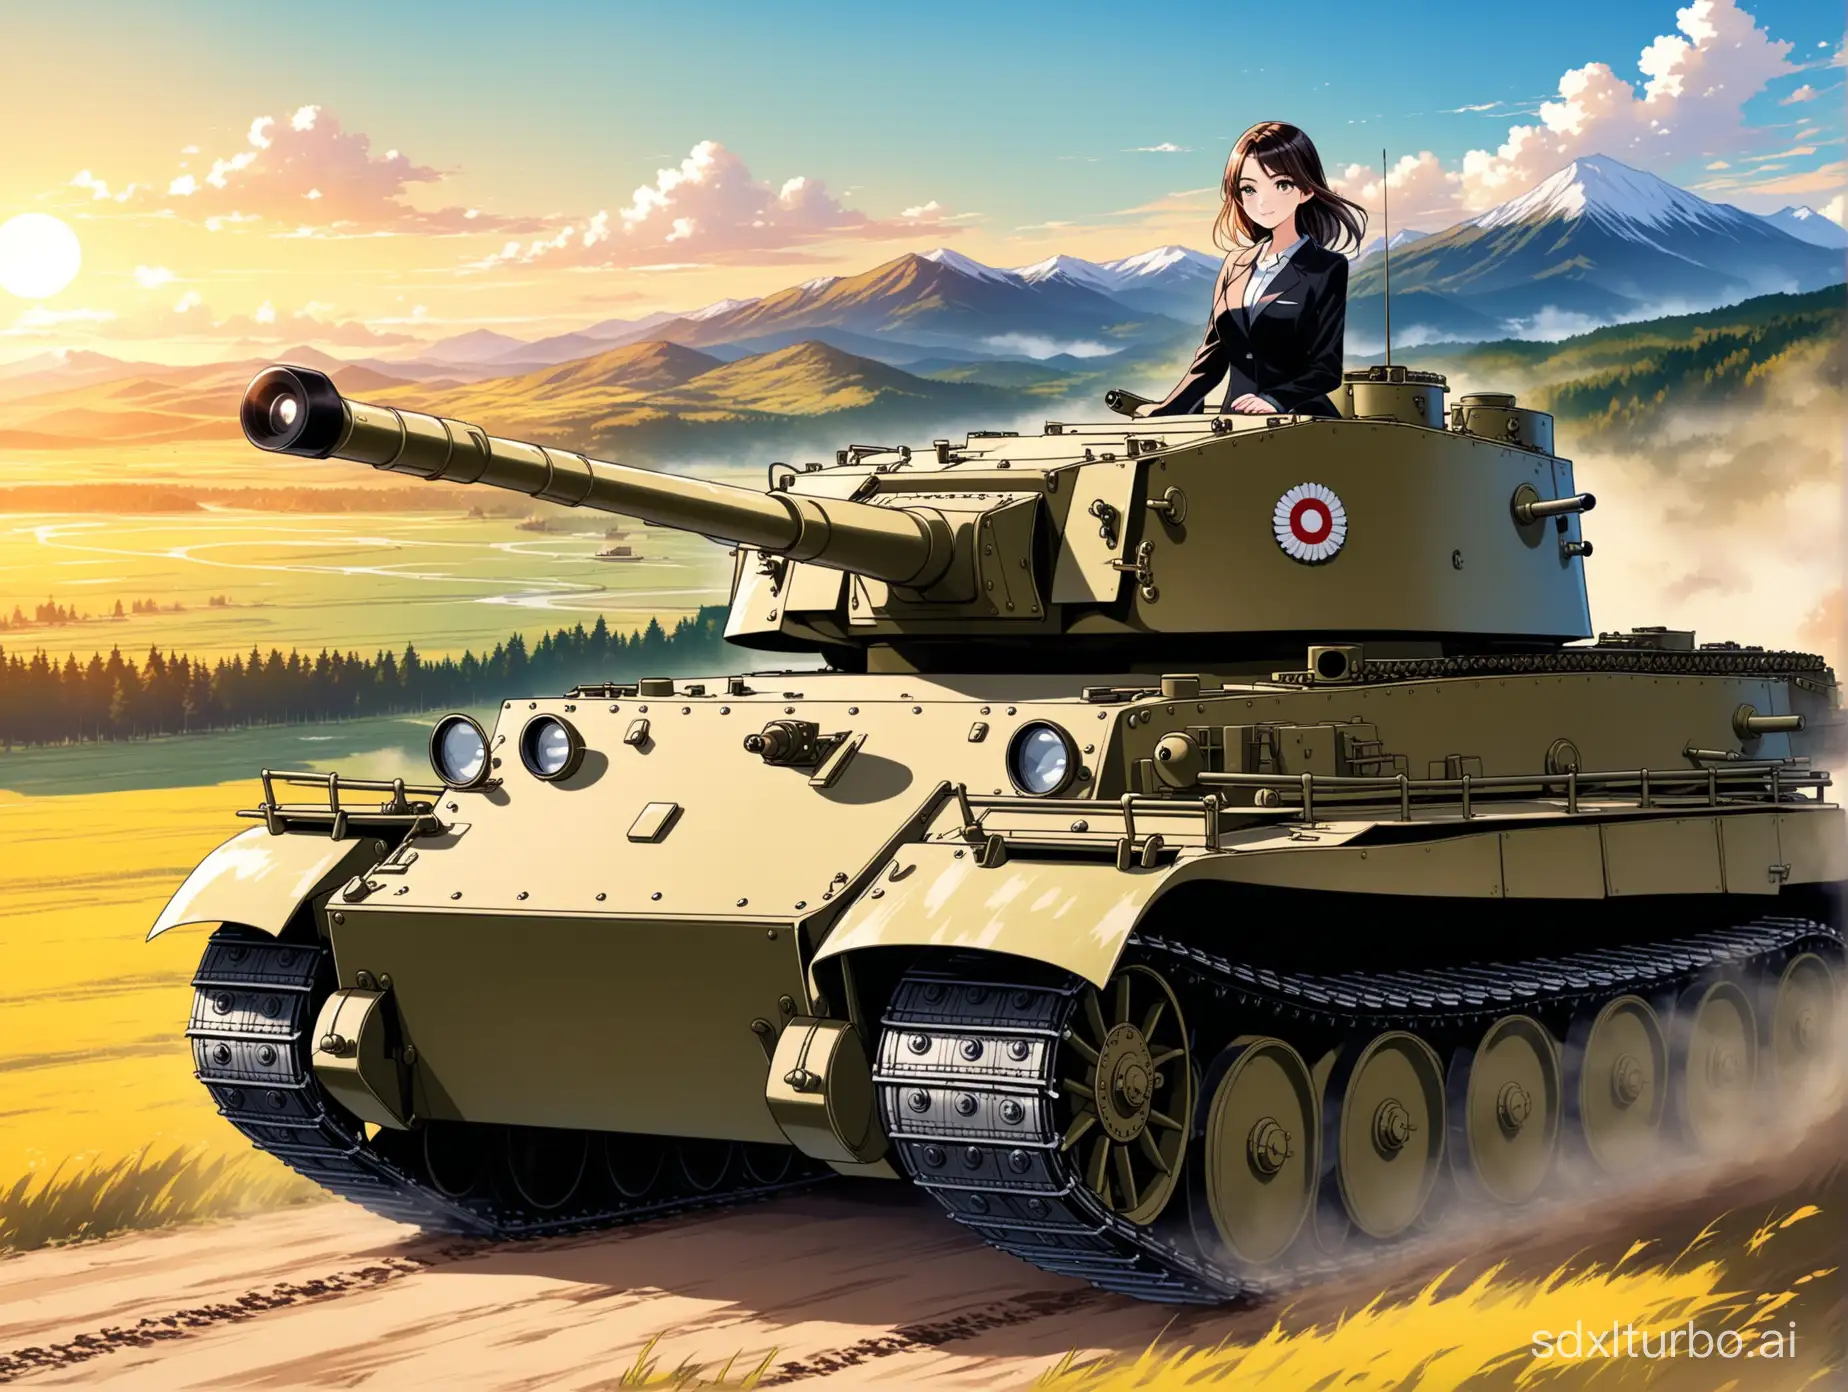 anime style, a woman in suit riding a German Tiger I tank, beautiful scenery